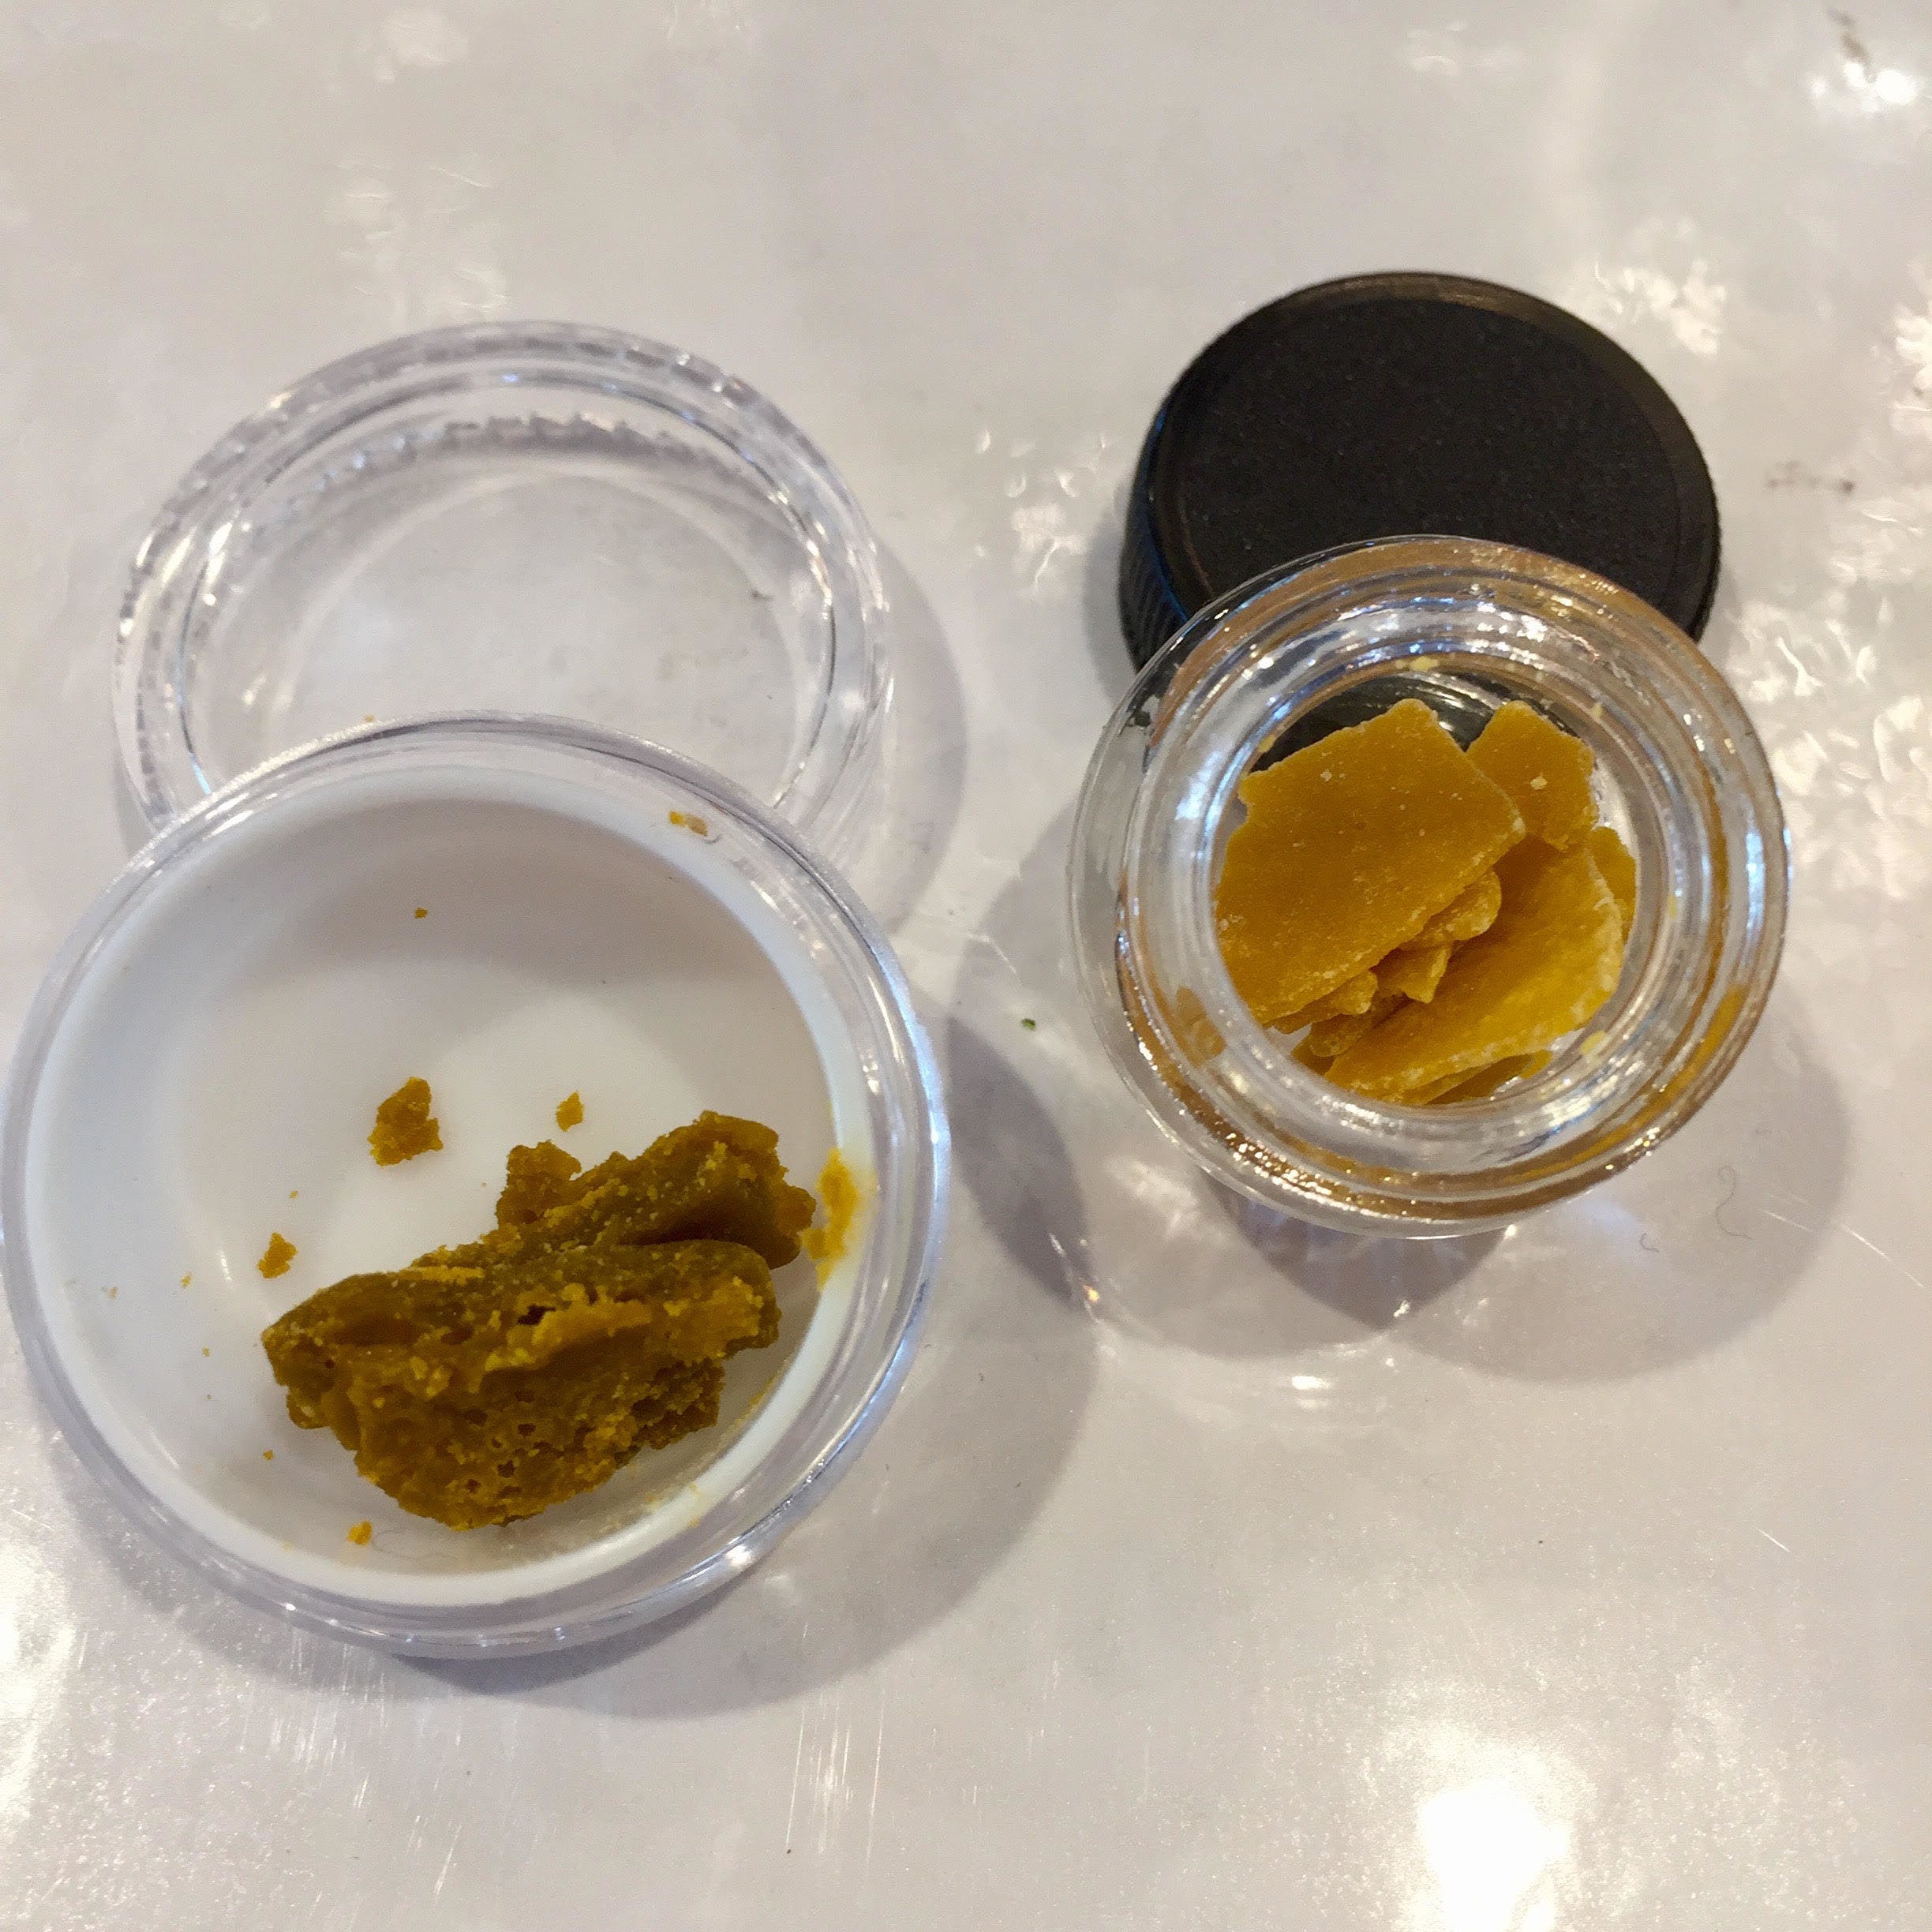 concentrate-house-wax-2420-before-12pm